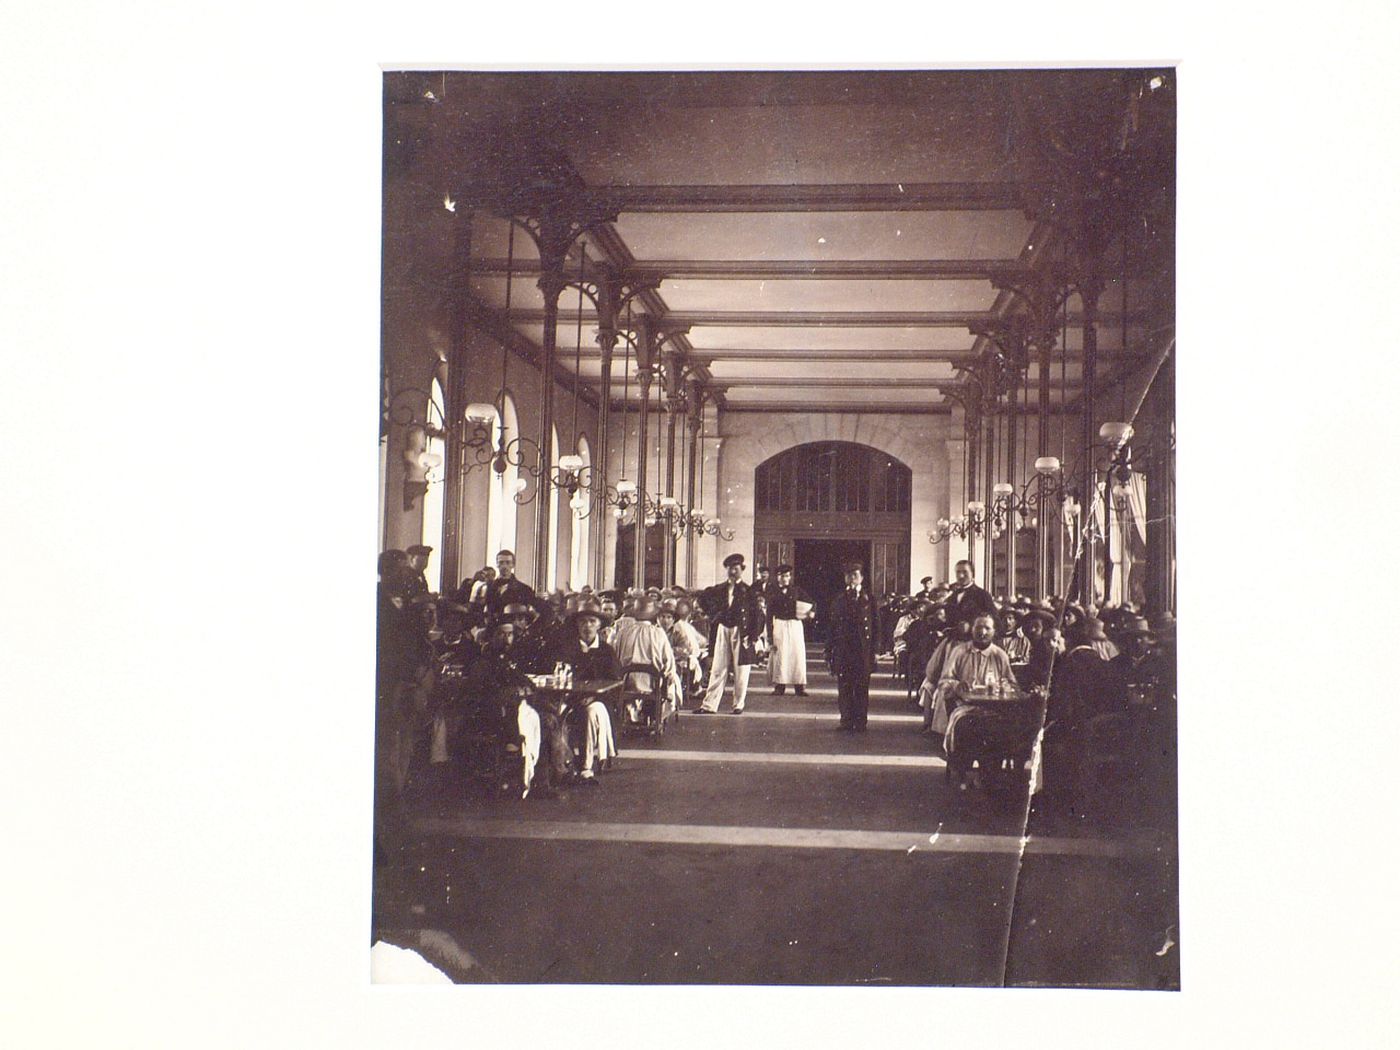 Imperial Asylum, interior view of the Refectory, Vincennes, France